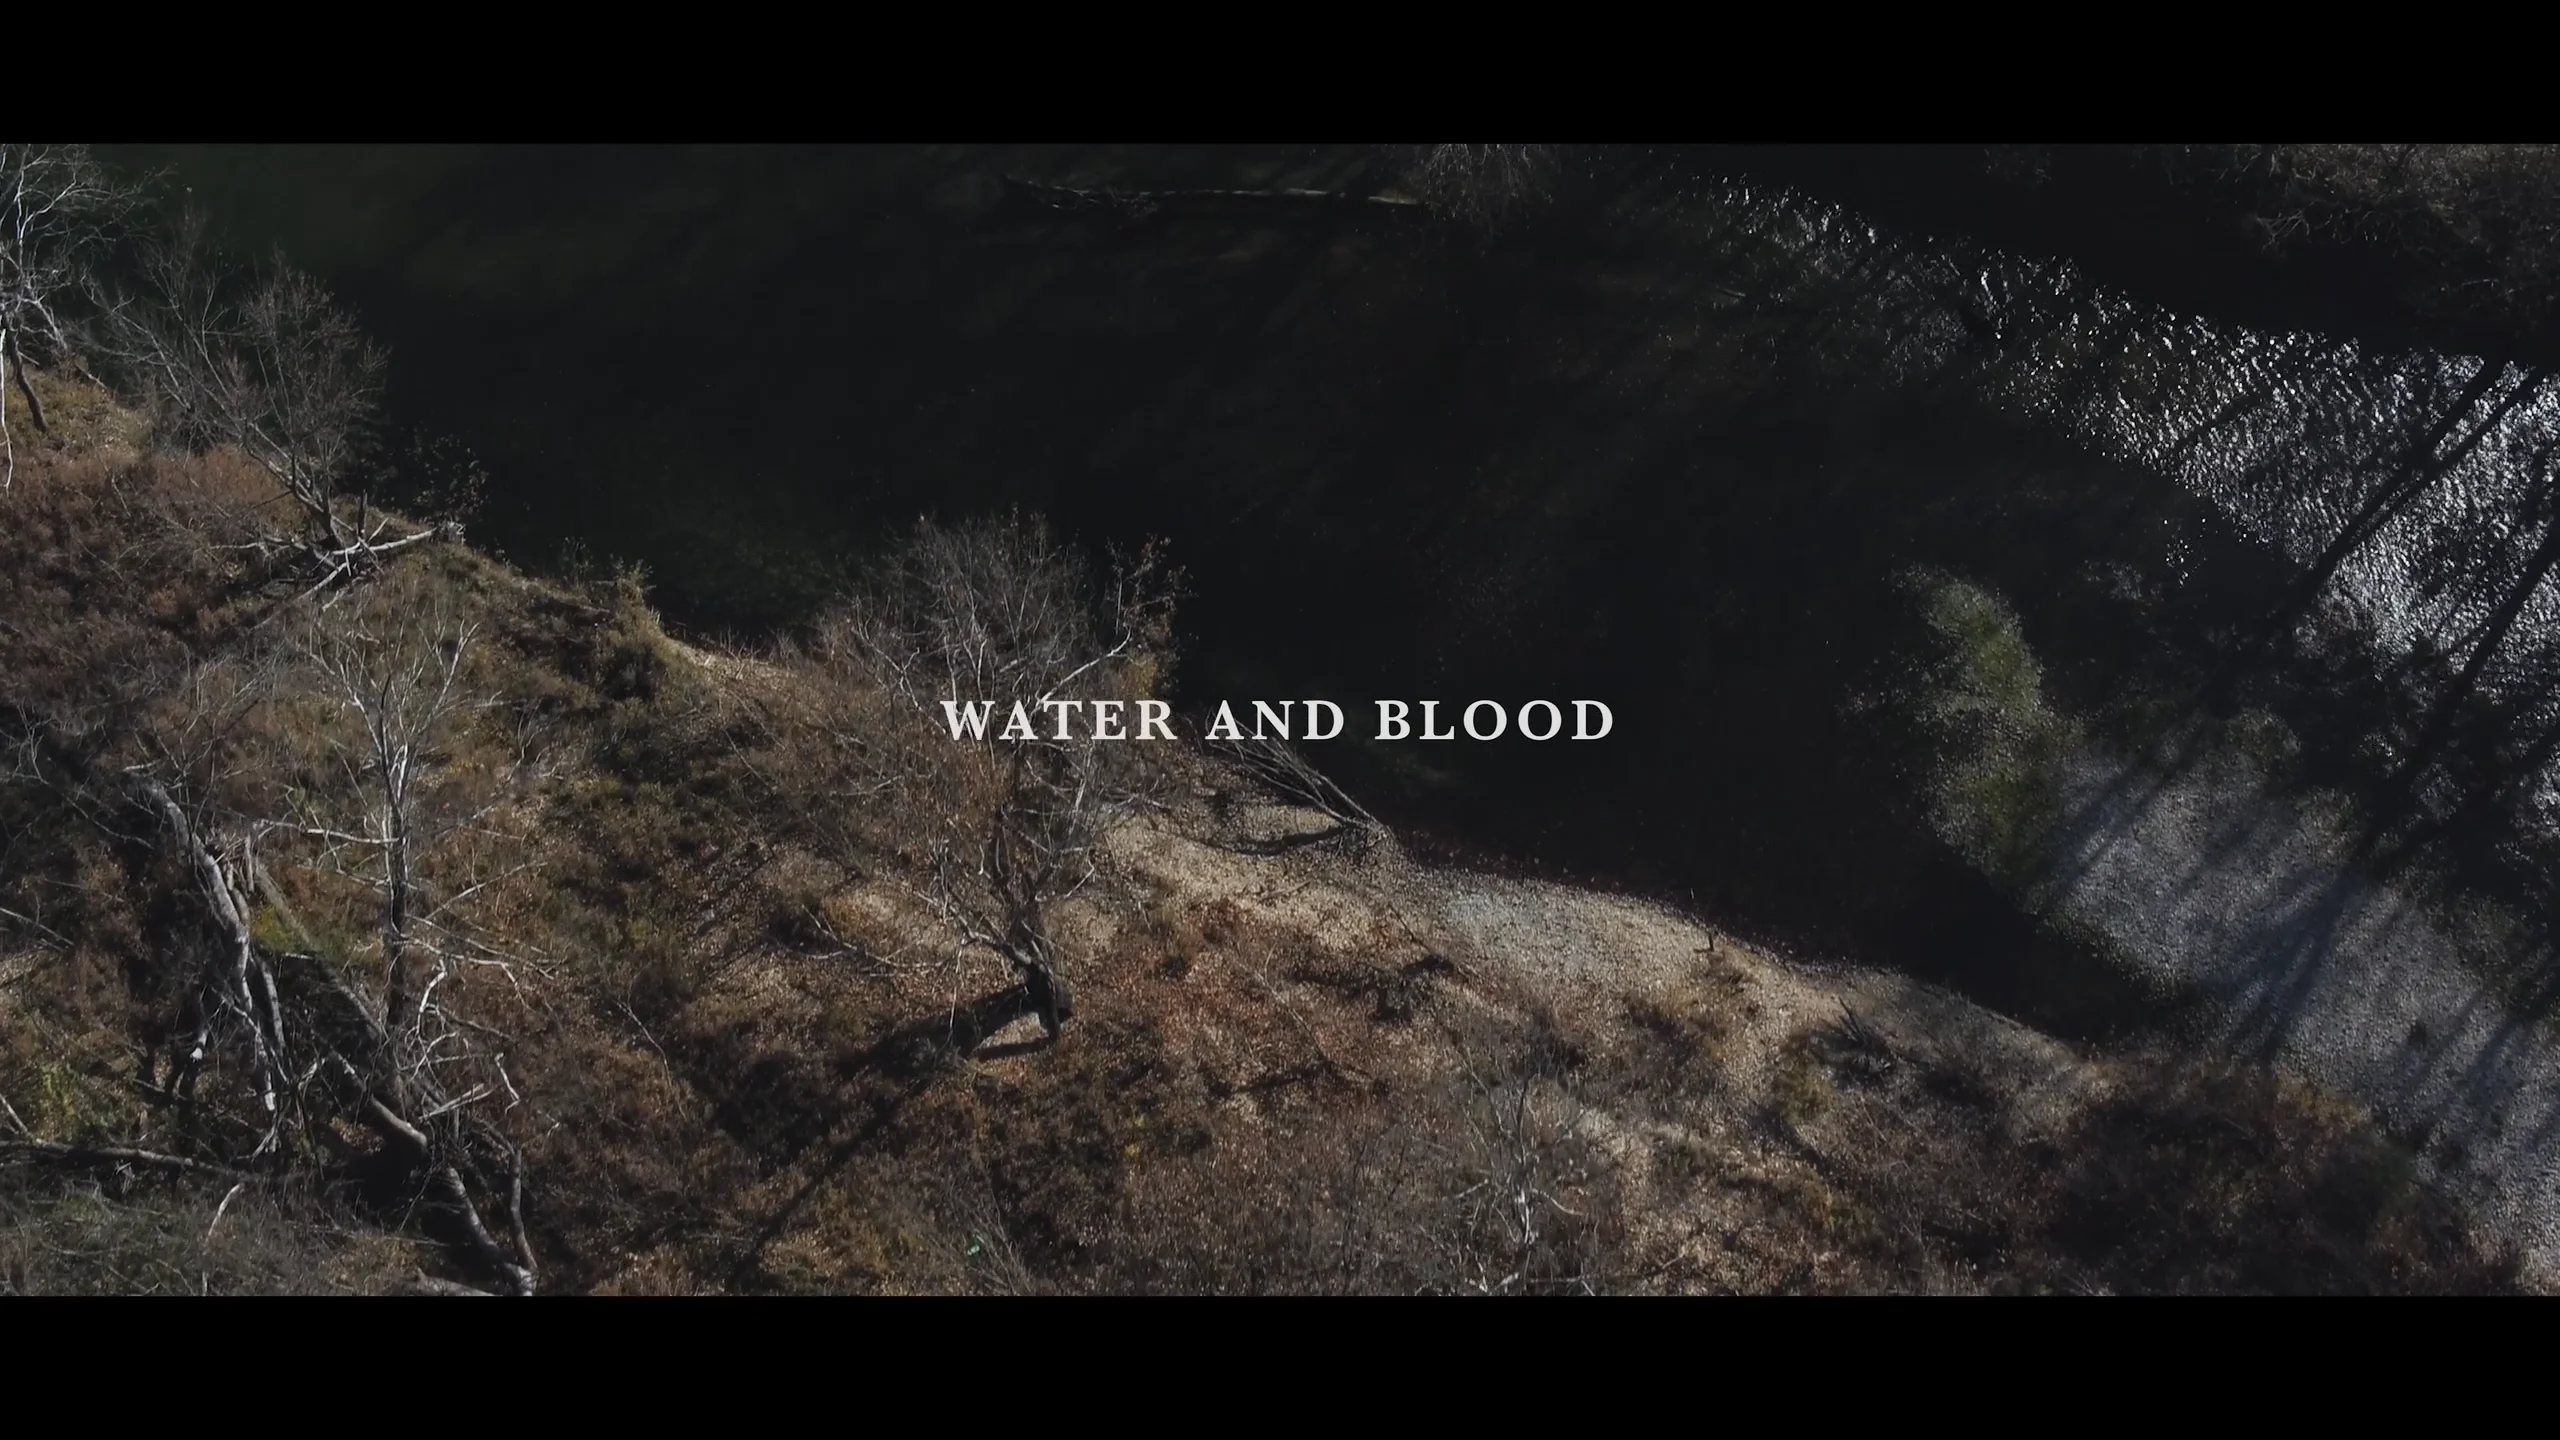 WATER AND BLOOD on Vimeo